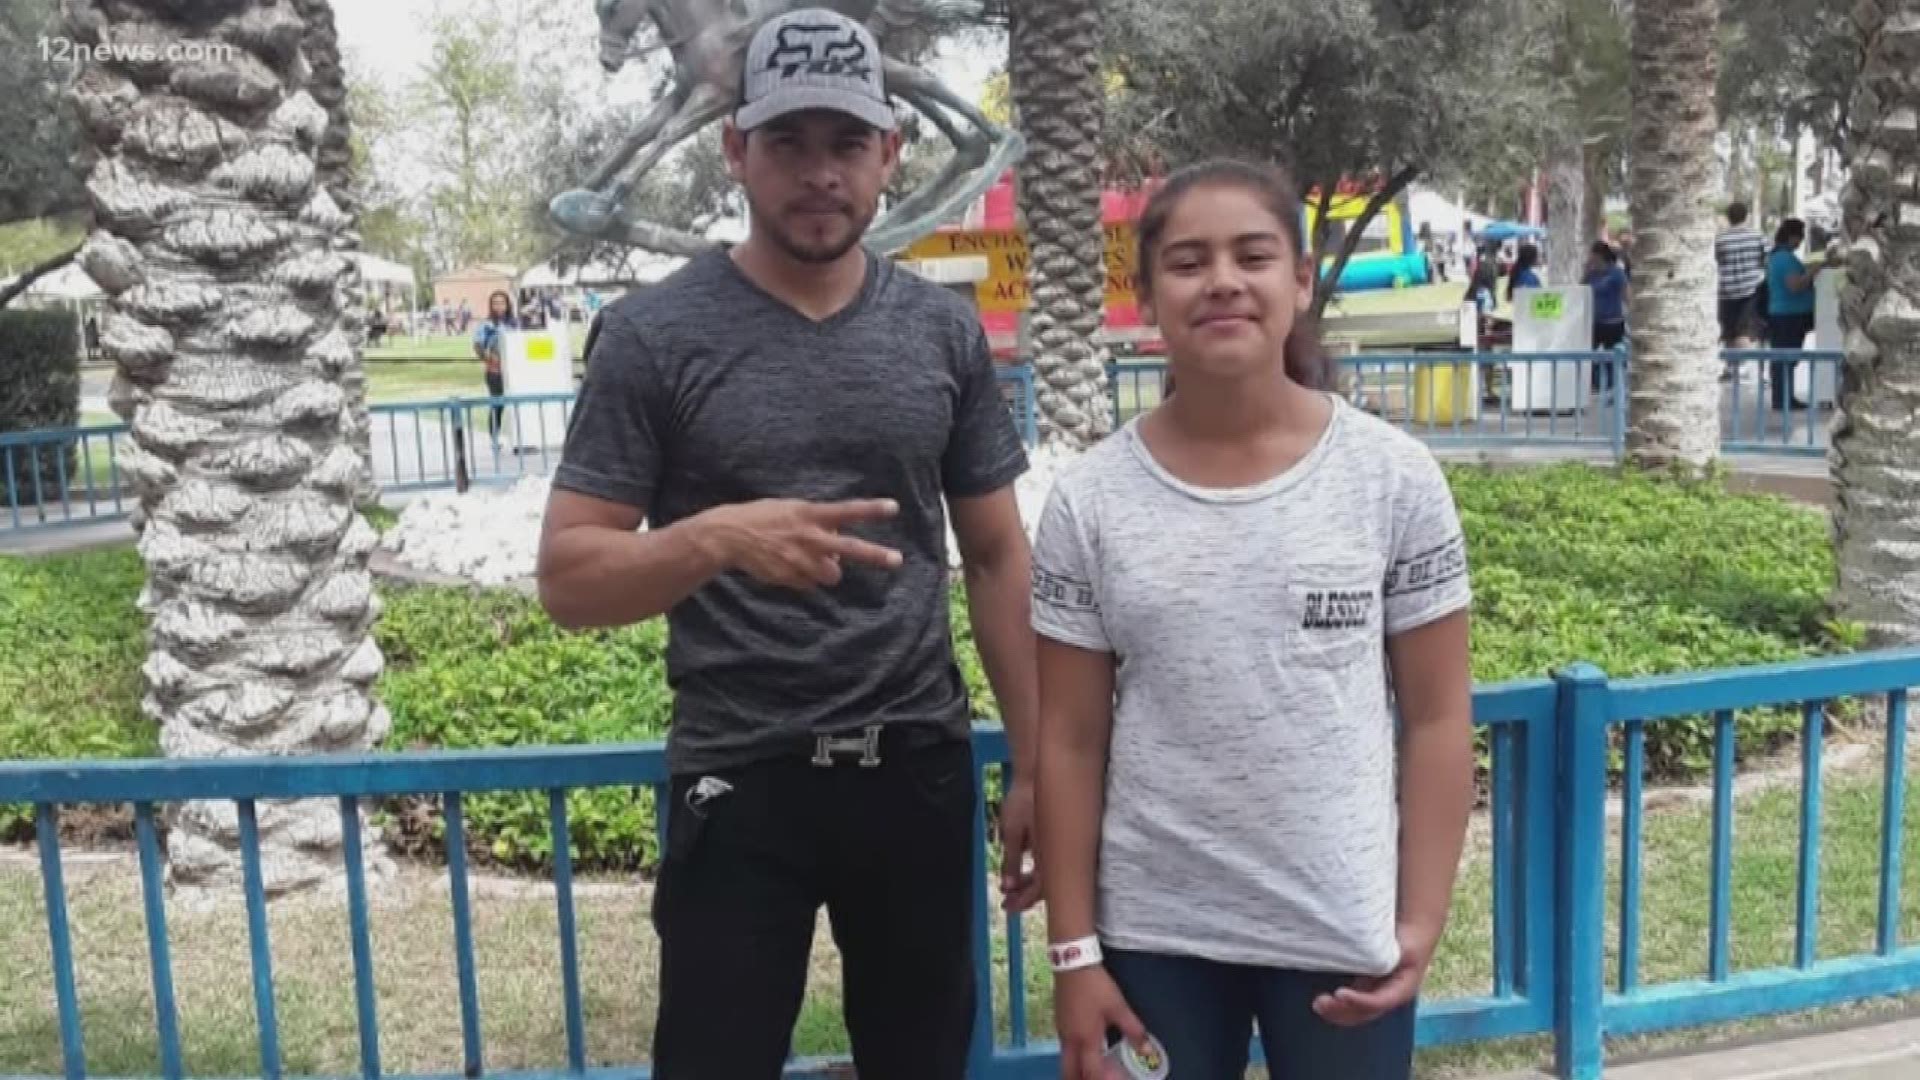 Omar Gonzalez was killed in a double homicide over the weekend along with his pregnant roommate. Her children were abducted by the suspect, Dimas Nunez Coronado. Tonight, Omar's daughter speaks to 12 News about the father she was just getting to know.